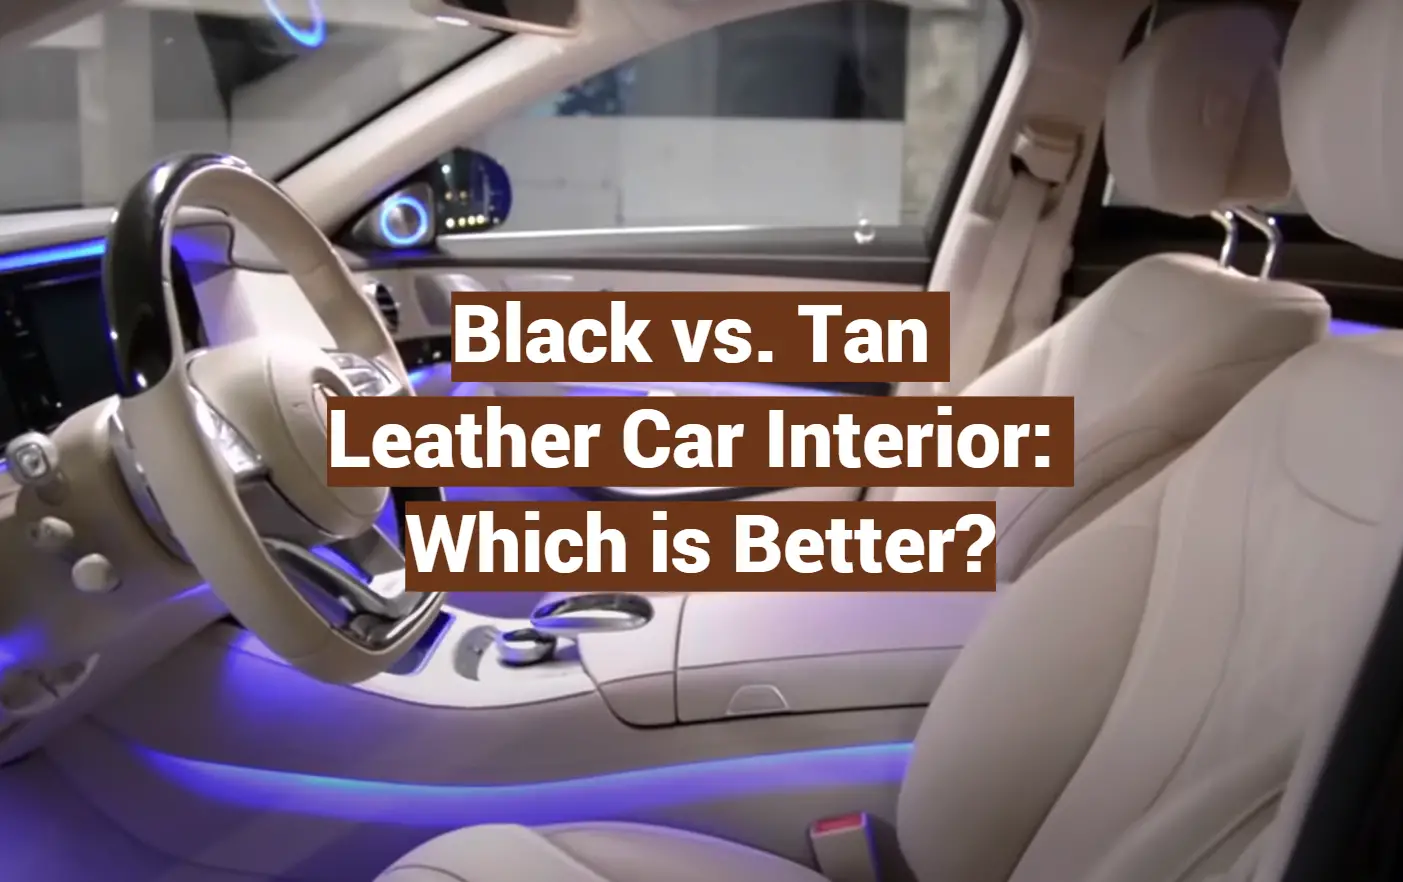 Black vs. Tan Leather Car Interior: Which is Better?